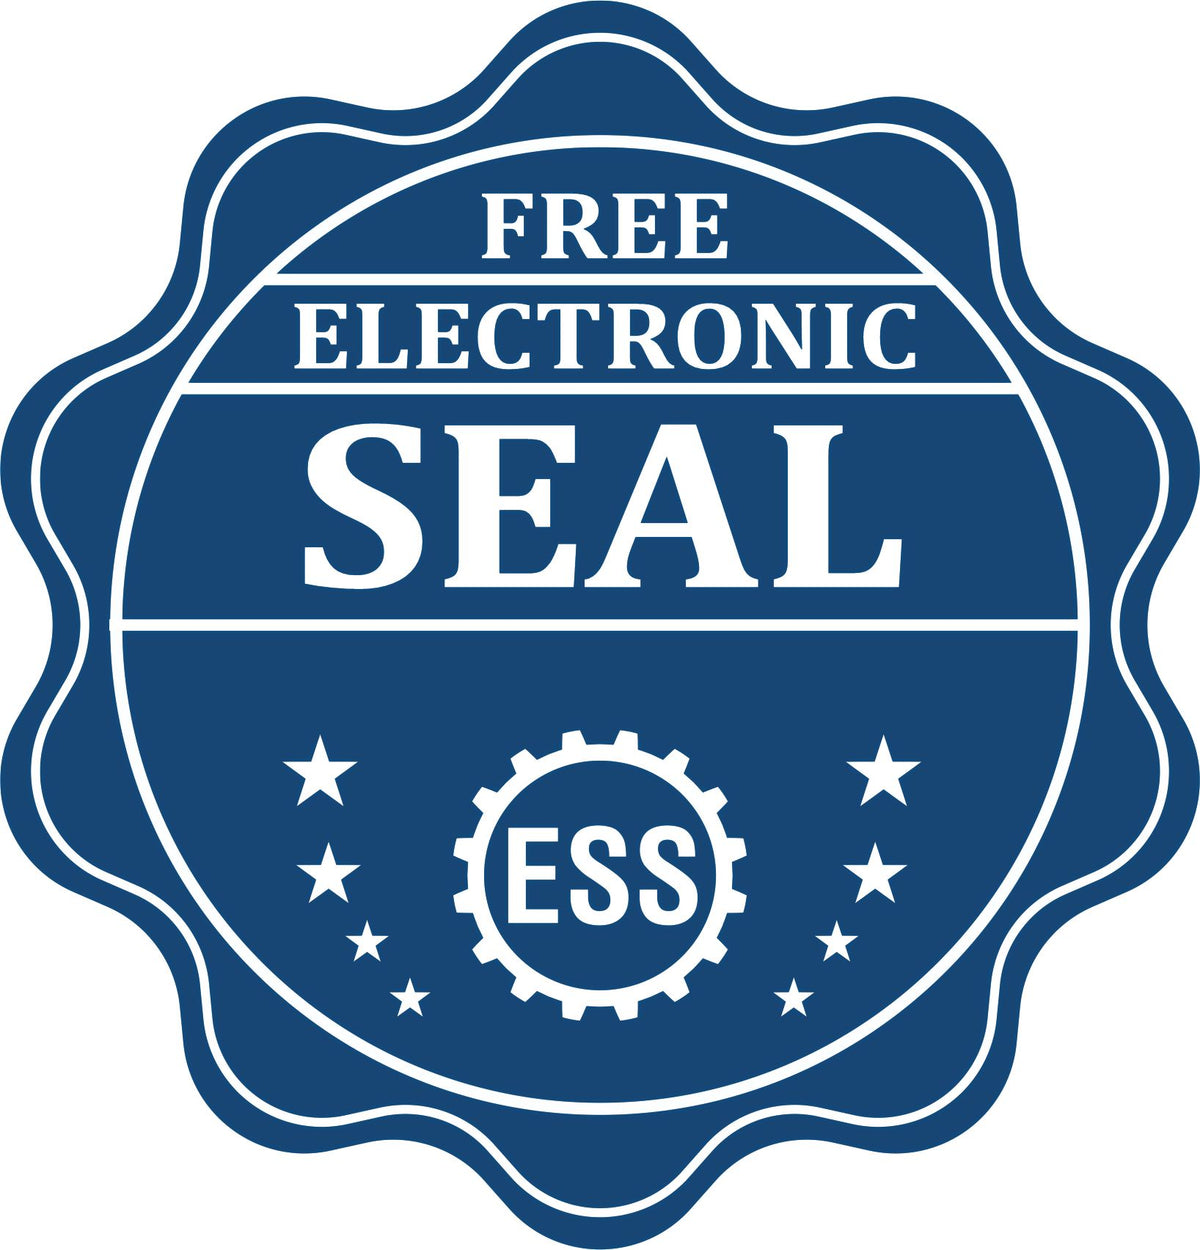 A badge showing a free electronic seal for the Soft West Virginia Professional Engineer Seal with stars and the ESS gear on the emblem.